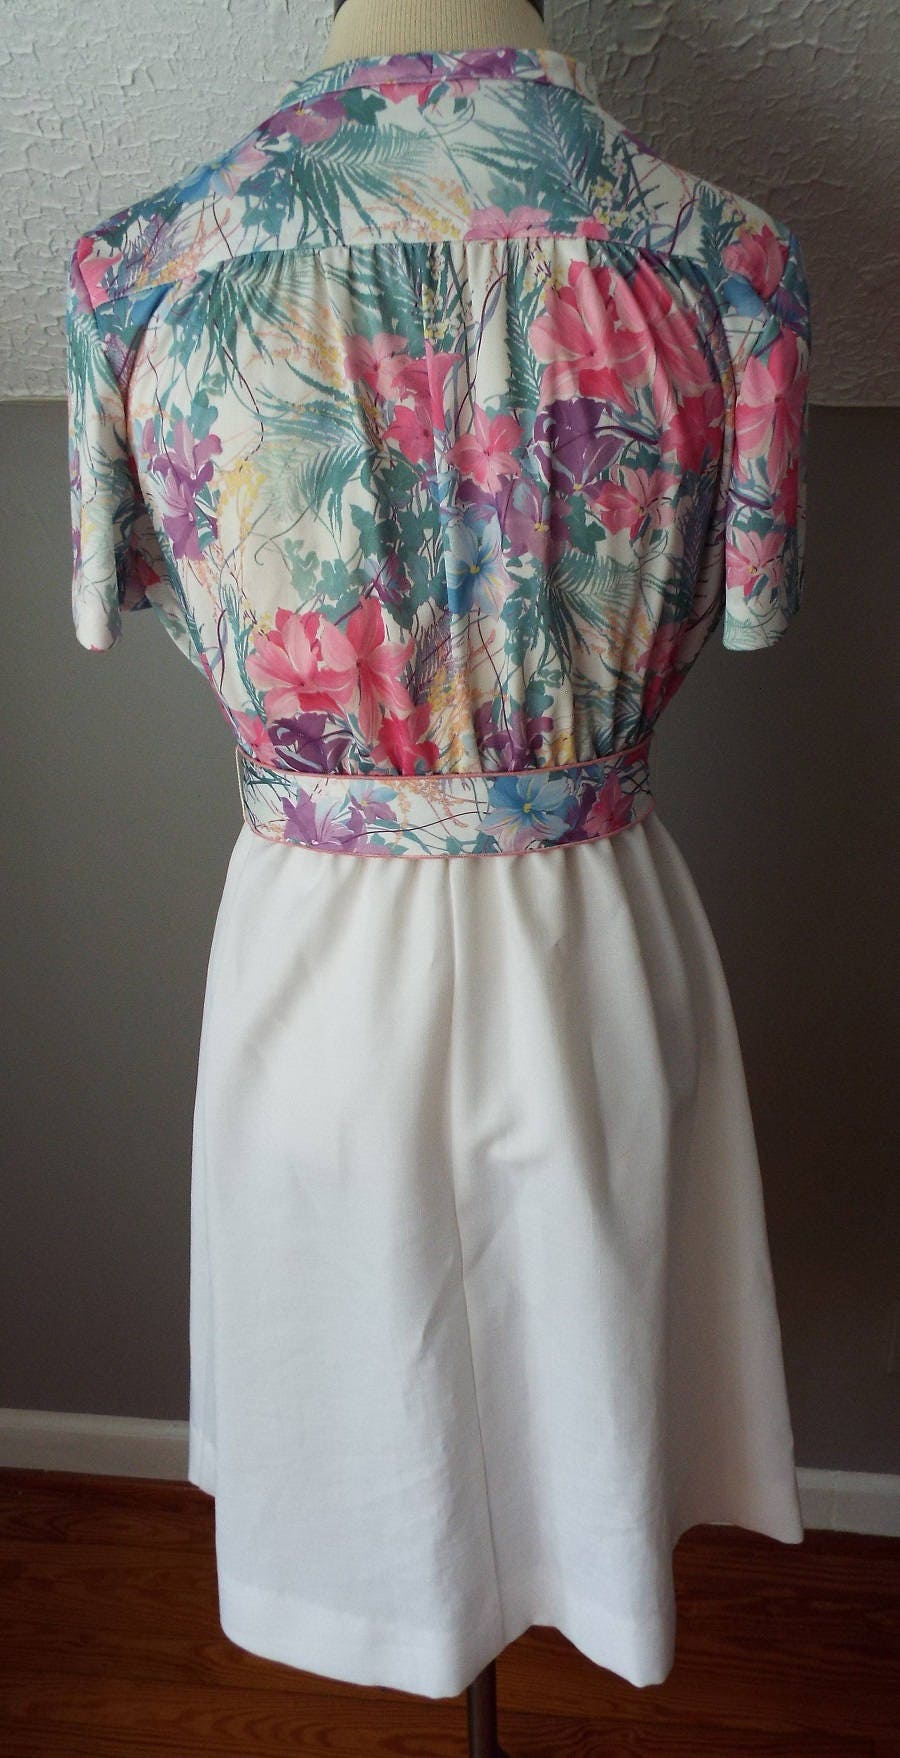 Vintage Short Sleeve Dress with Colorful Floral Print